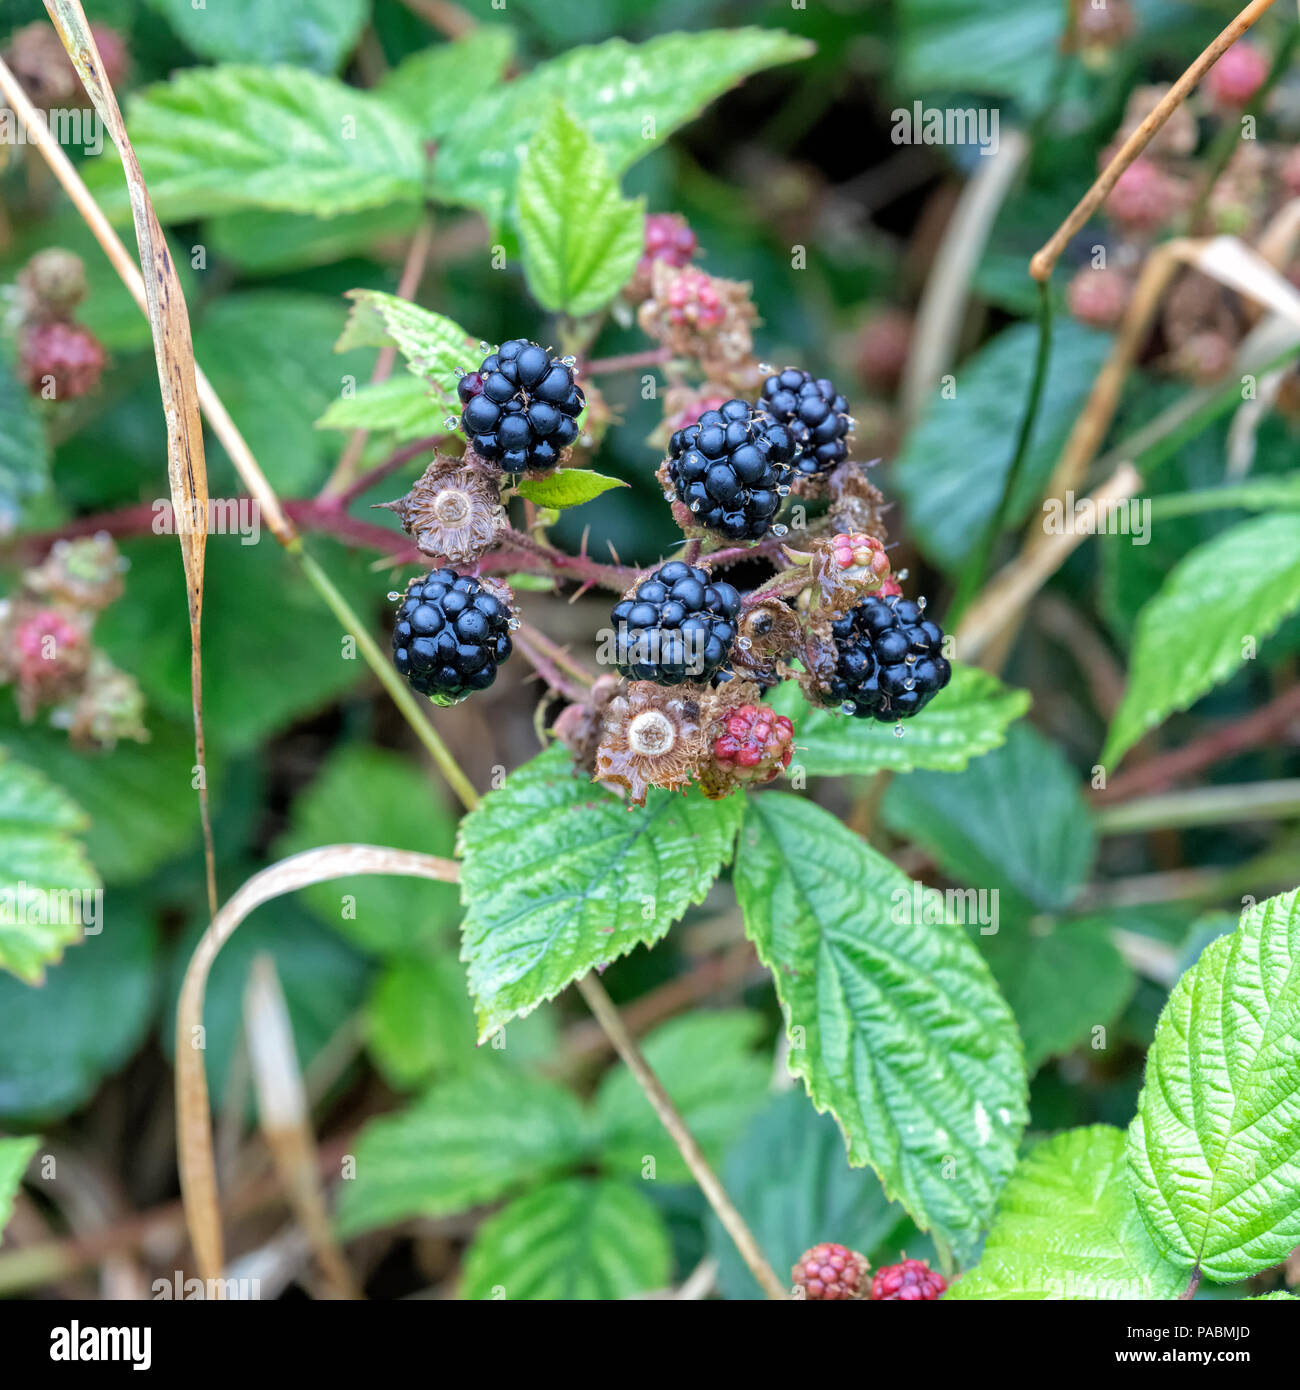 Collection 90+ Pictures Images Of Blackberry Bushes Excellent